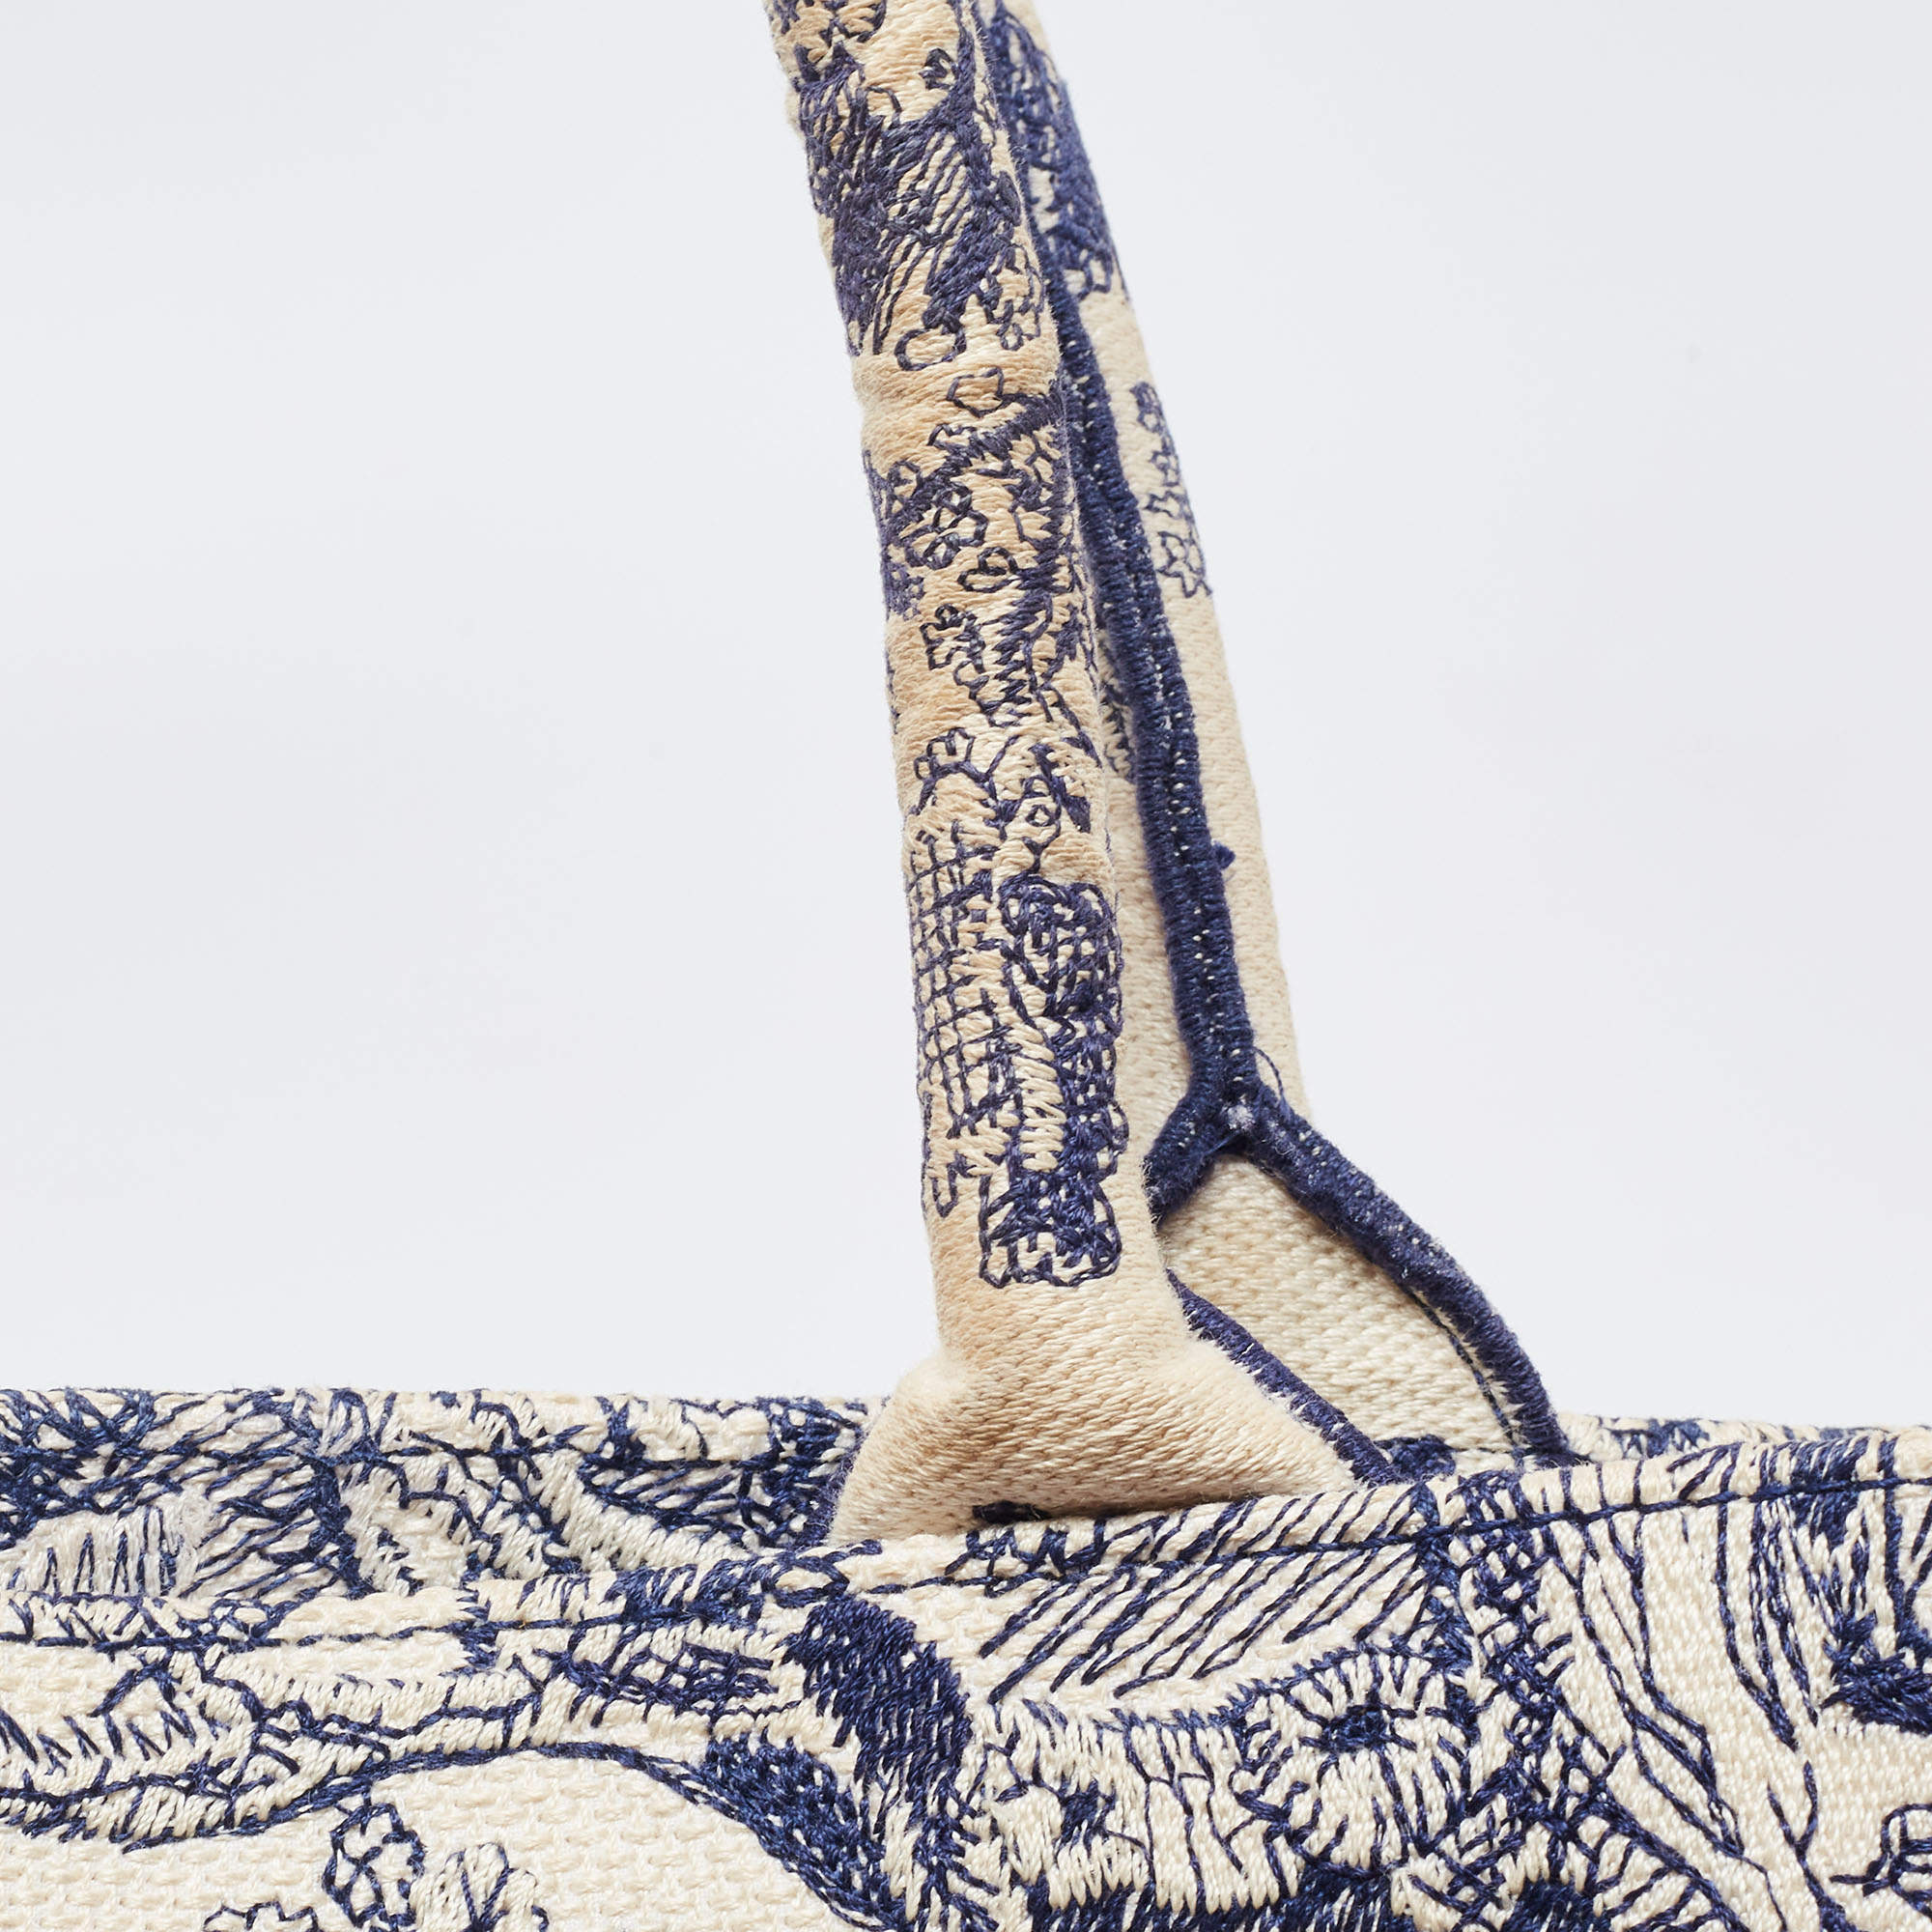 Dior - Small Dior Book Tote White and Navy Blue Toile de Jouy Embroidery (26.5 x 21 x 14 cm) - Women